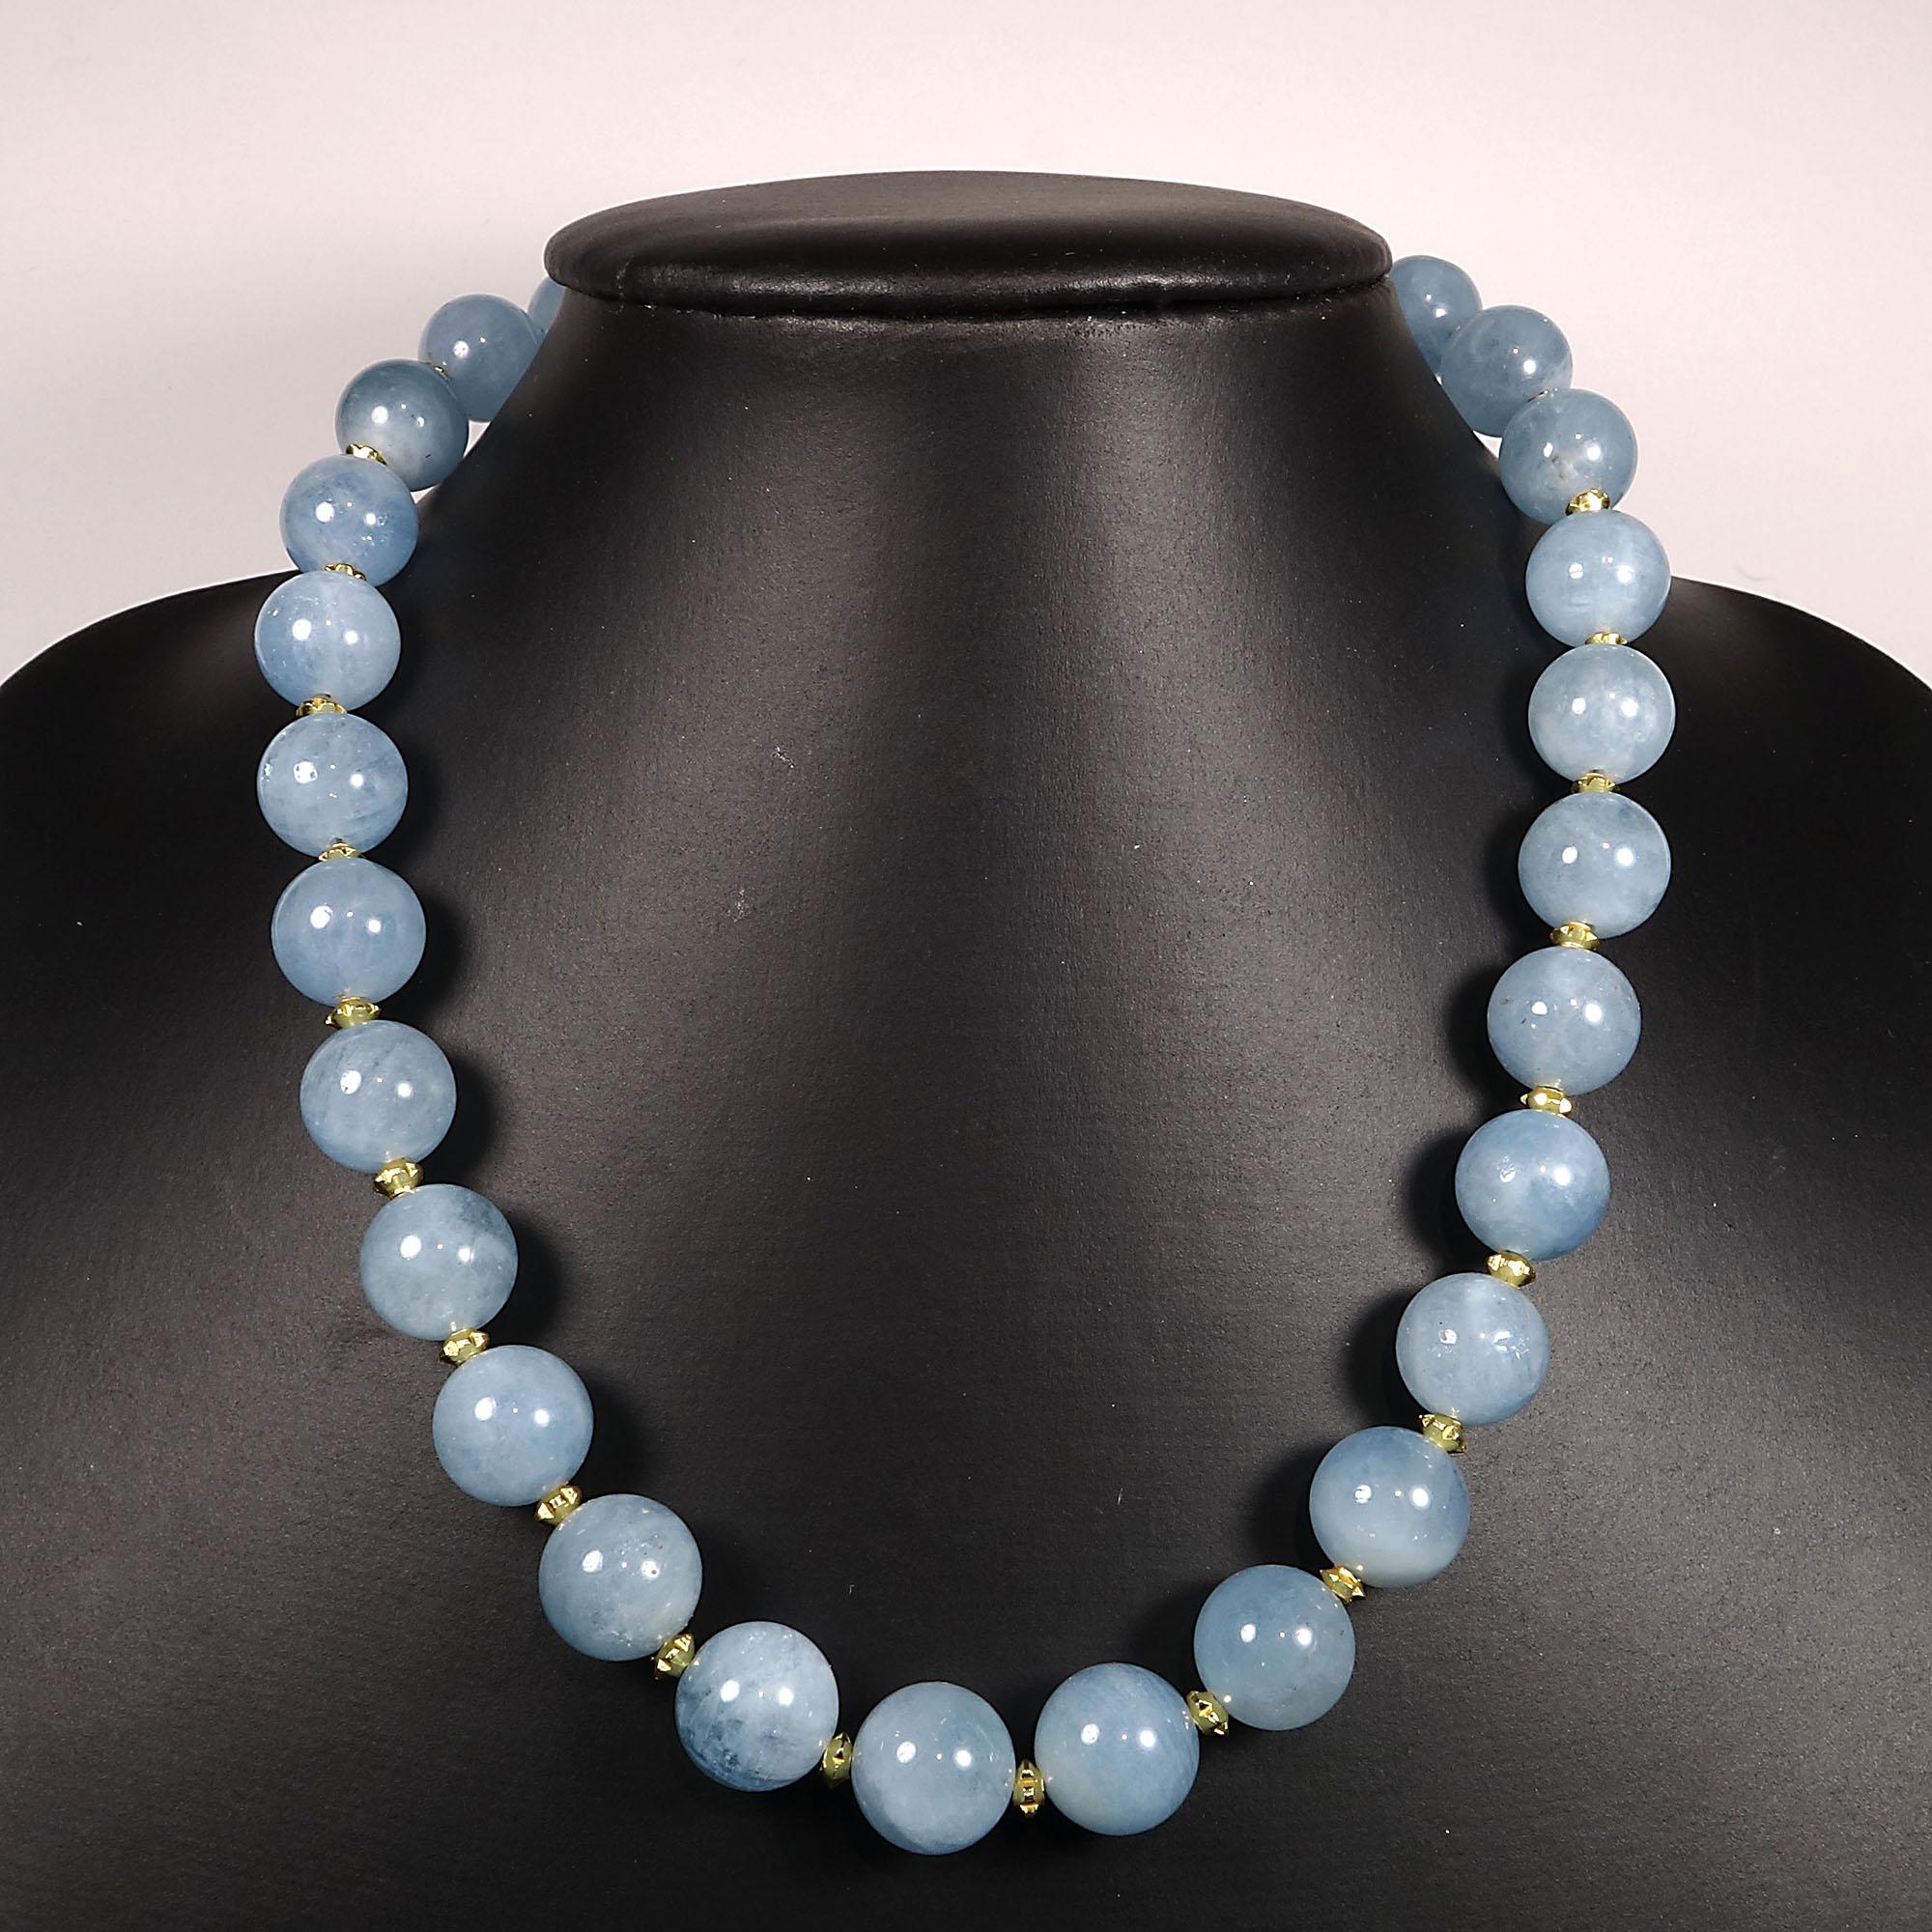 16.5 Inch translucent 12MM Aquamarine with gold tone enhancements choker necklace.  This handmade choker necklace is secured with a 14K gold plated hook and eye.  Aquamarine is the March birthstone.